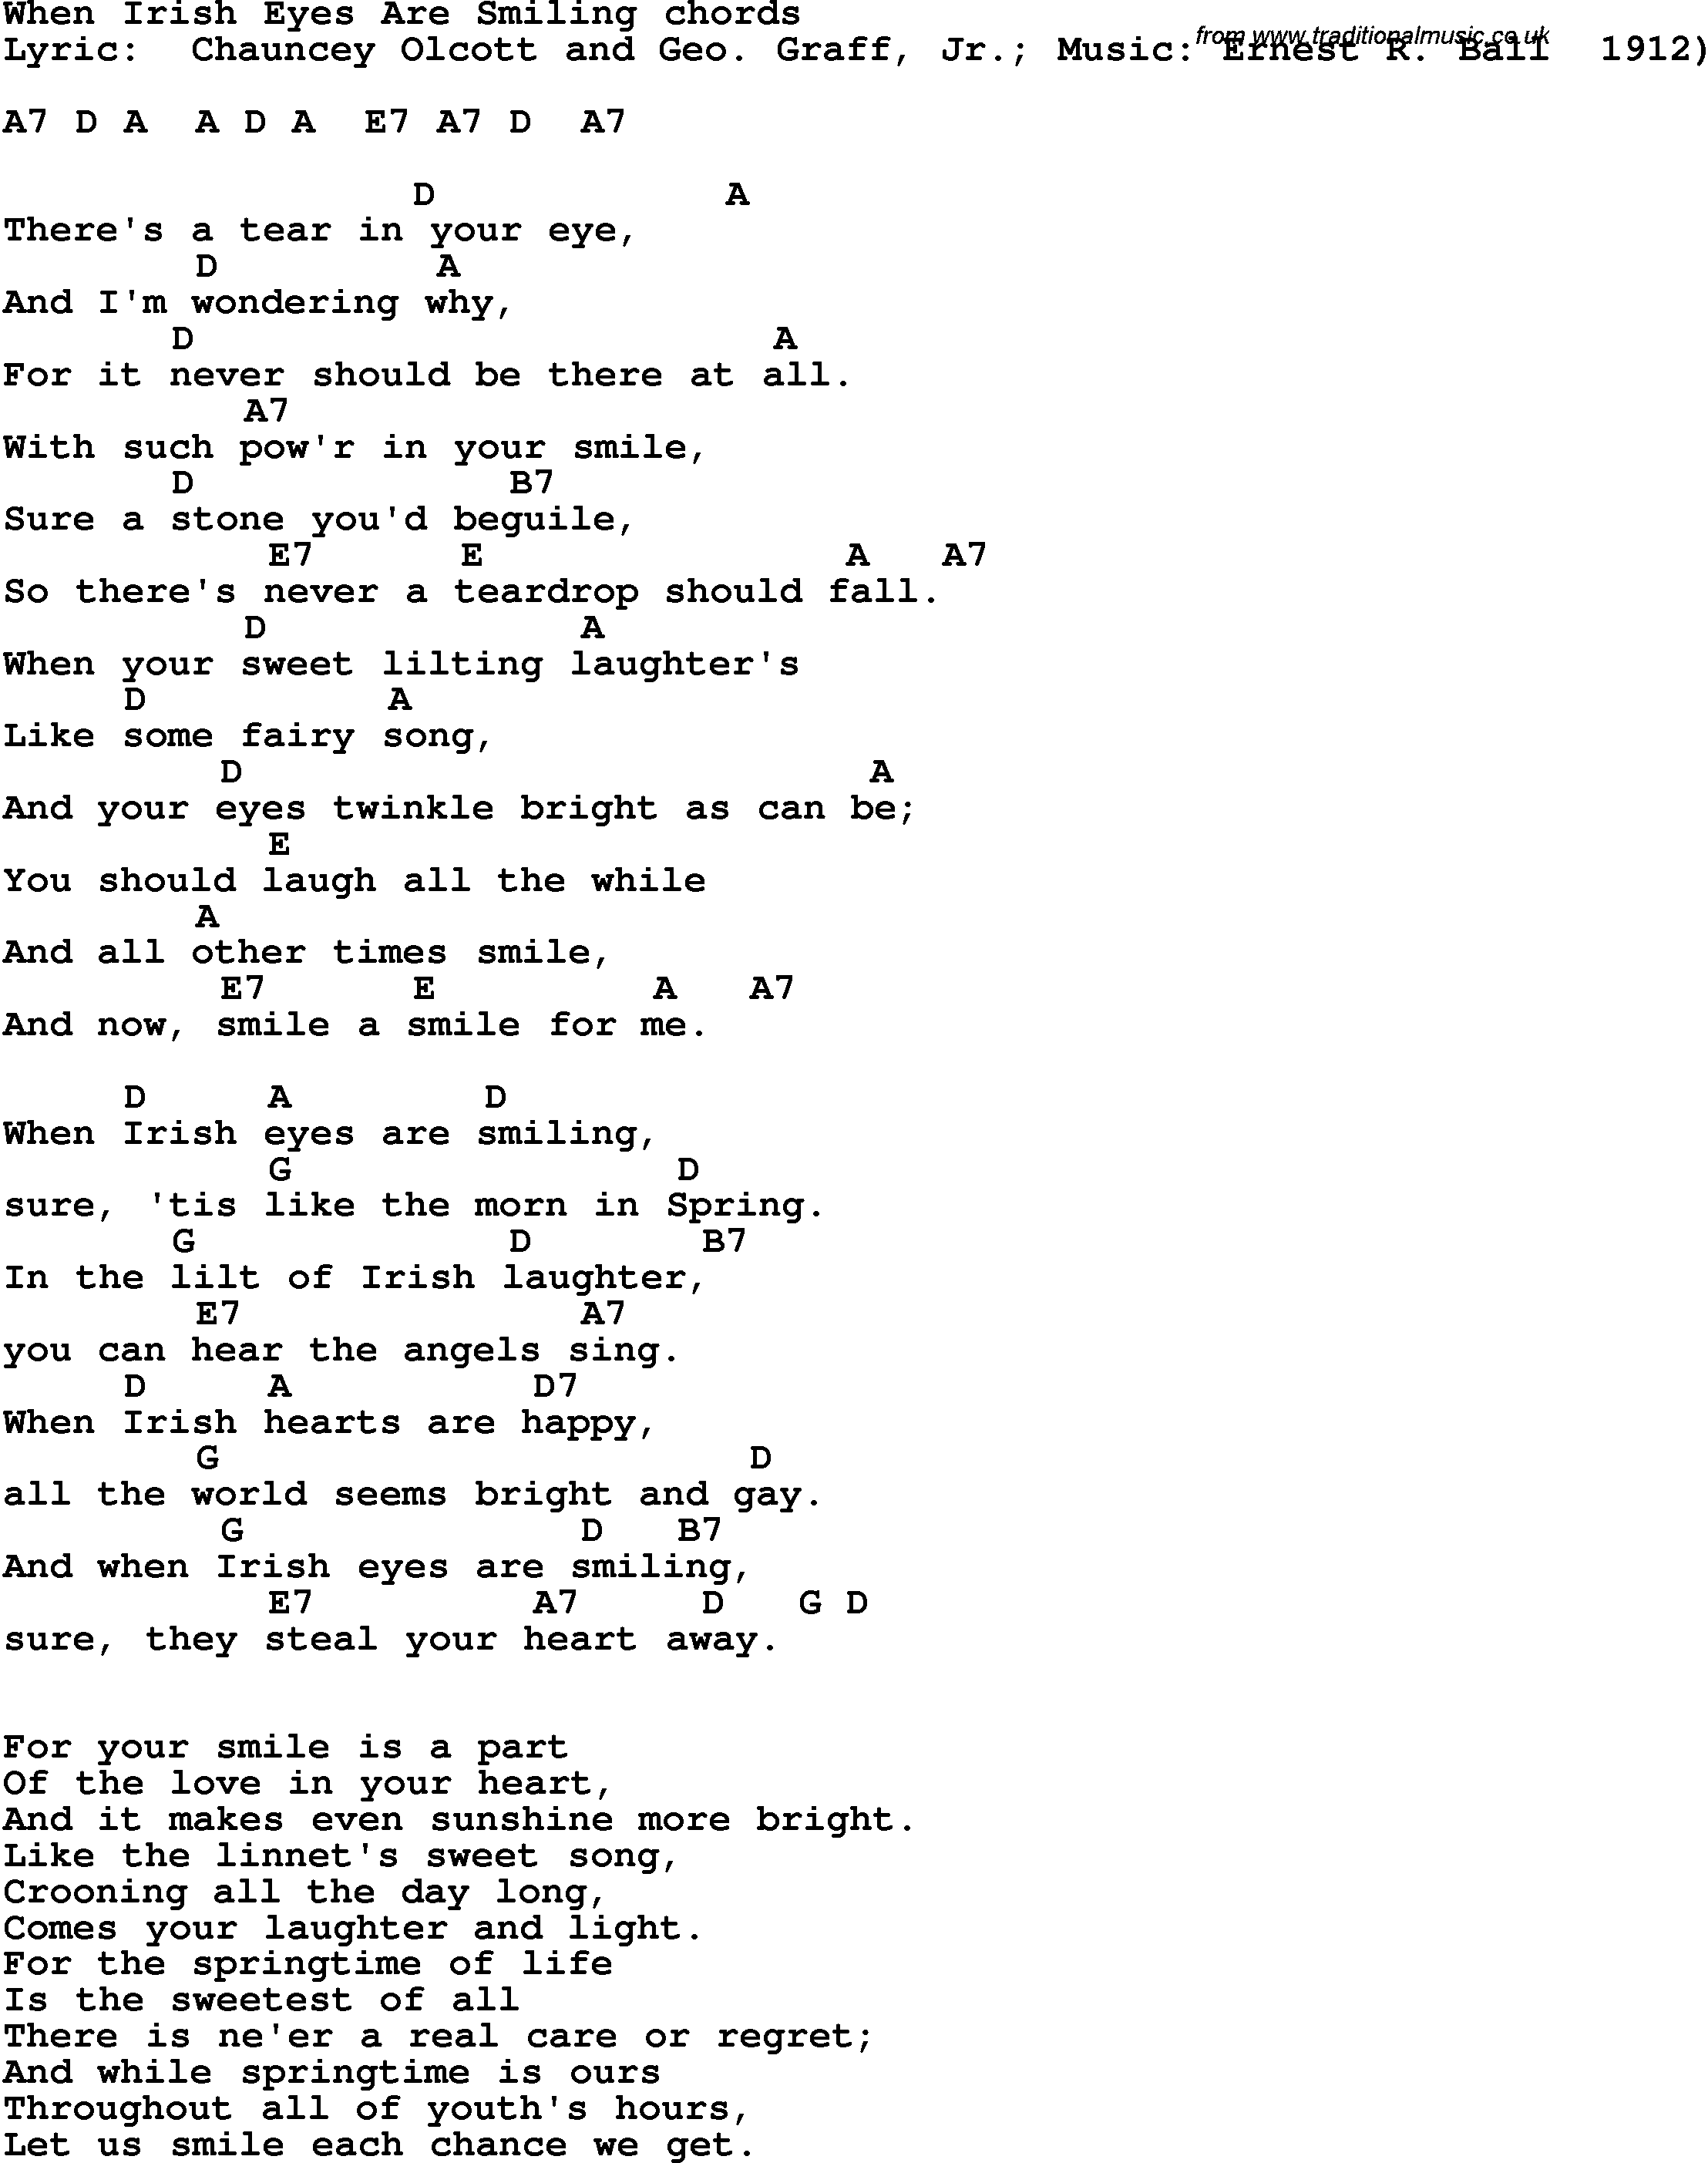 Song Lyrics with guitar chords for When Irish Eyes Are Smiling